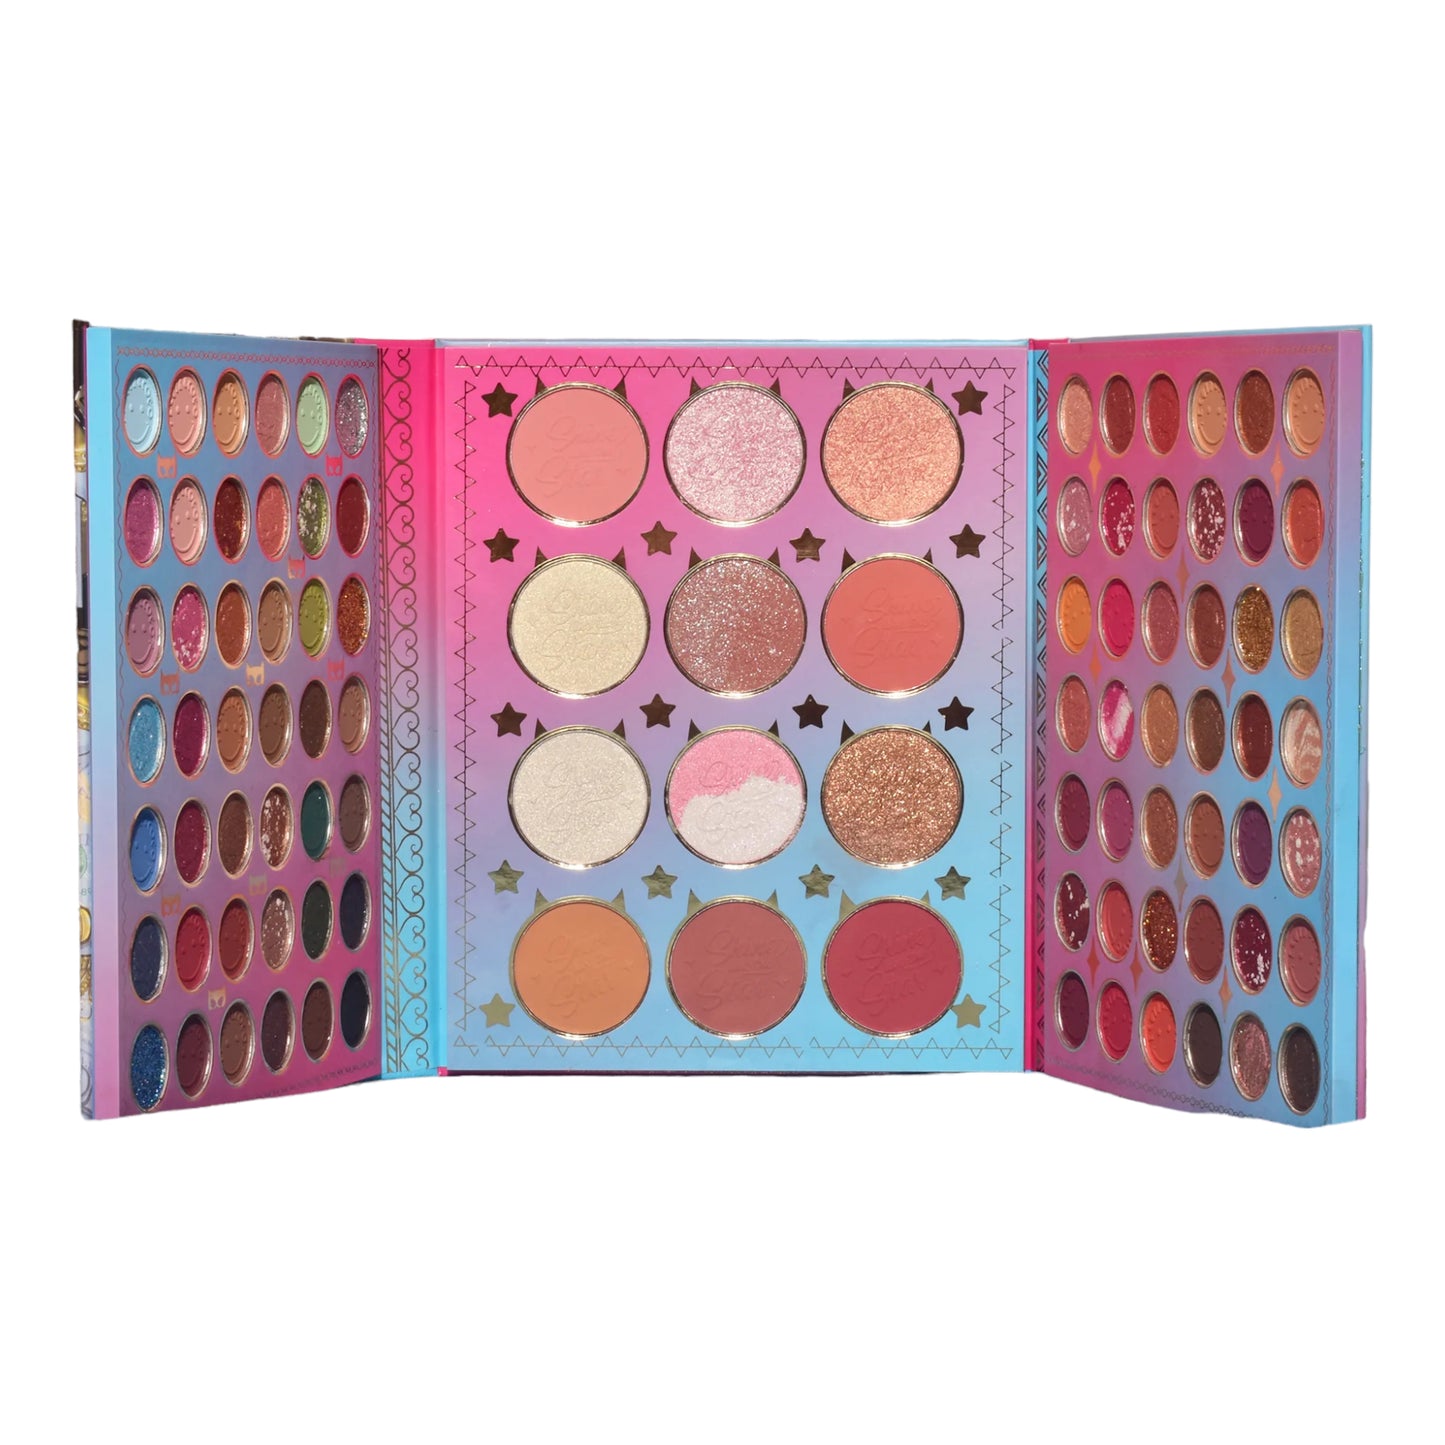 KEVIN&COCO CAT GIRL 96 COLOR EYESHADOW PALETTE KC233953 R9